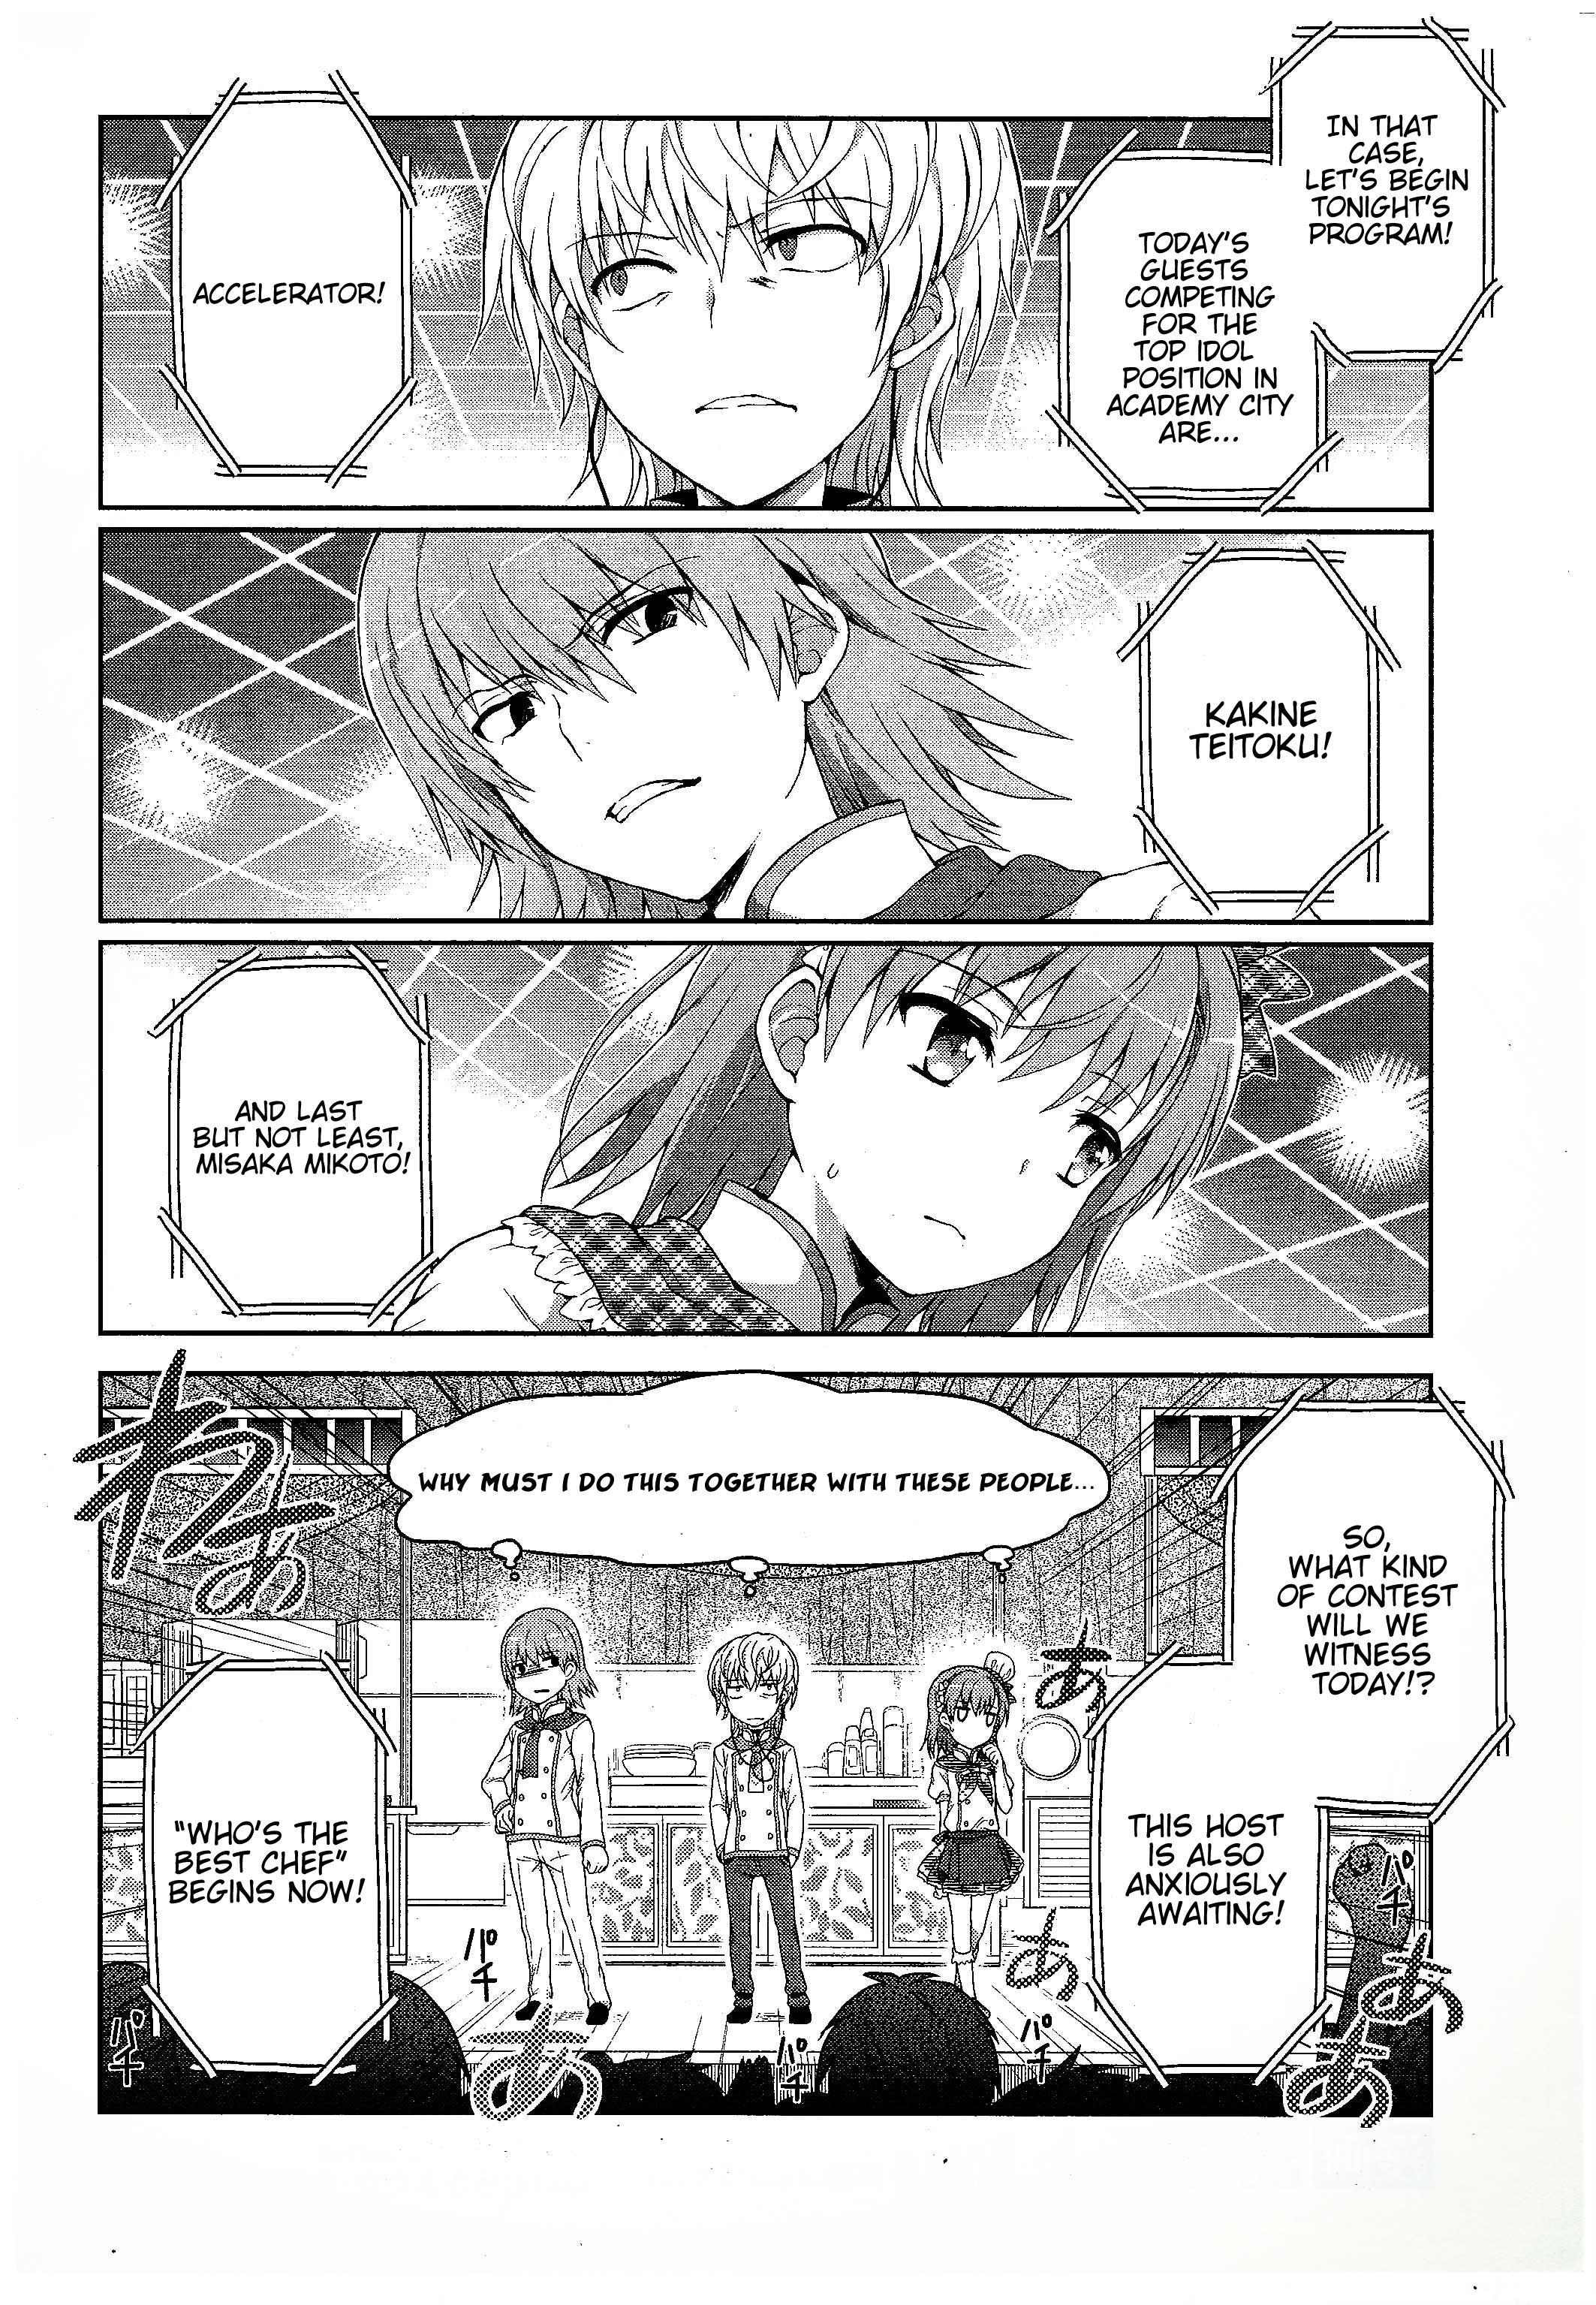 A Certain Idol Accelerator Chapter 4 - Picture 2